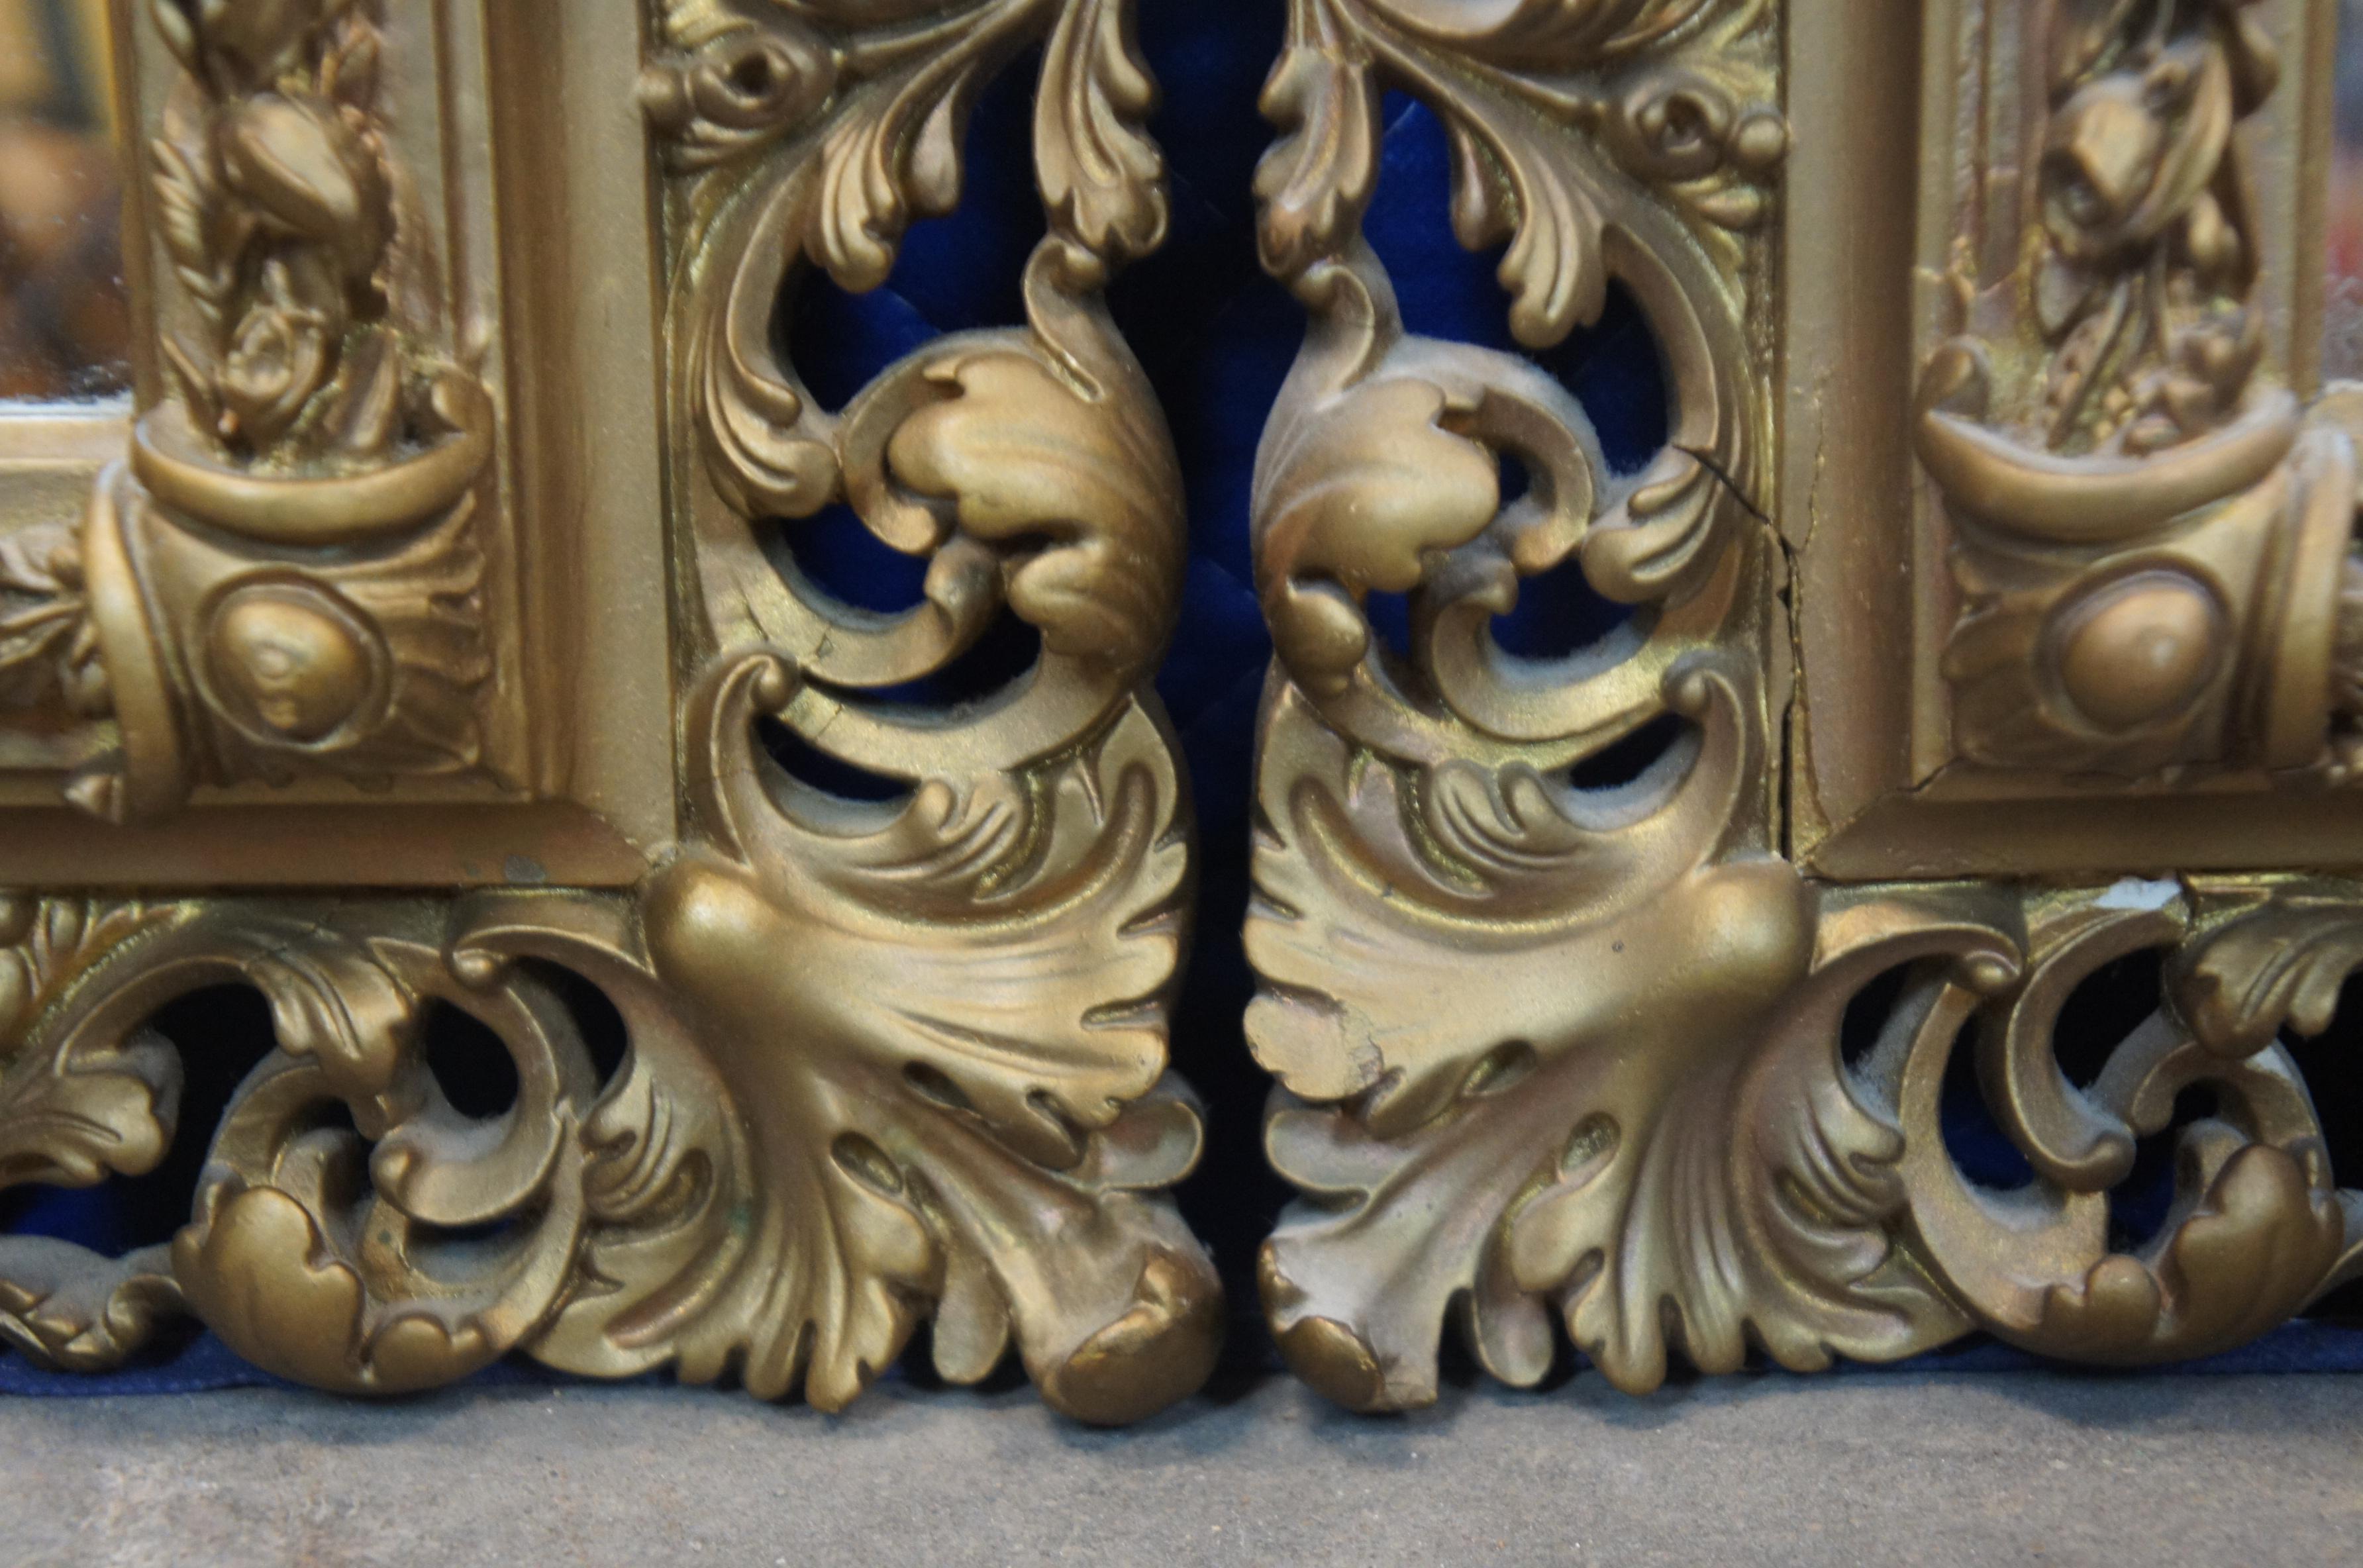 2 Antique French Baroque Rococo Gold Gilt Mirrors Pierced Floral Leaves For Sale 1